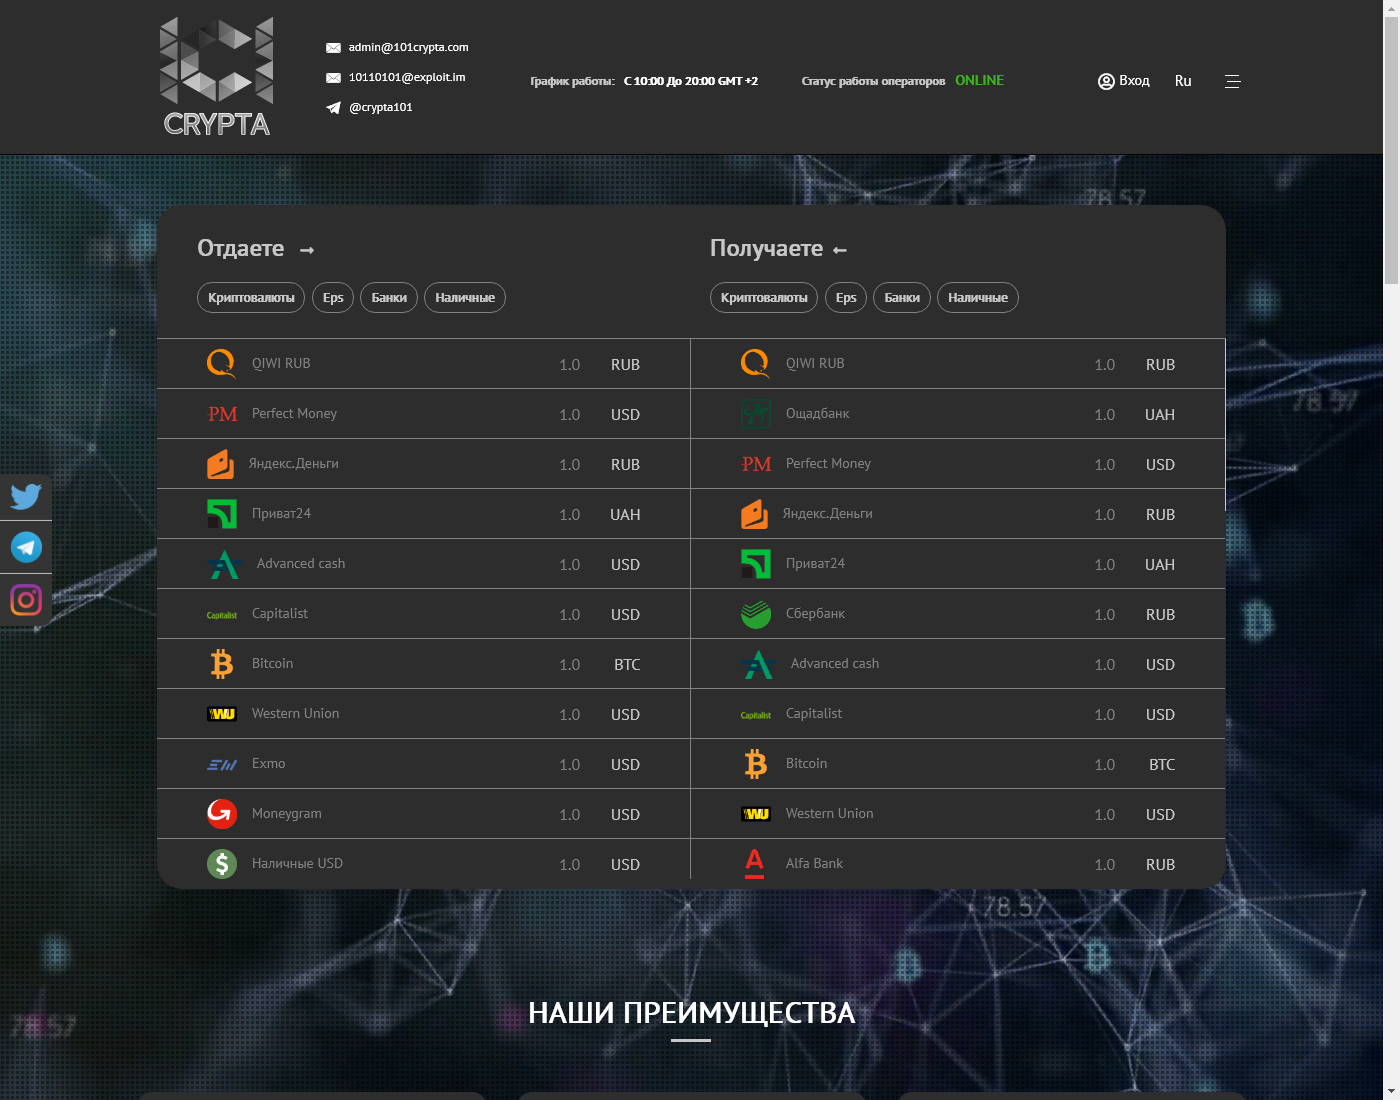 101crypta user interface: the home page in English